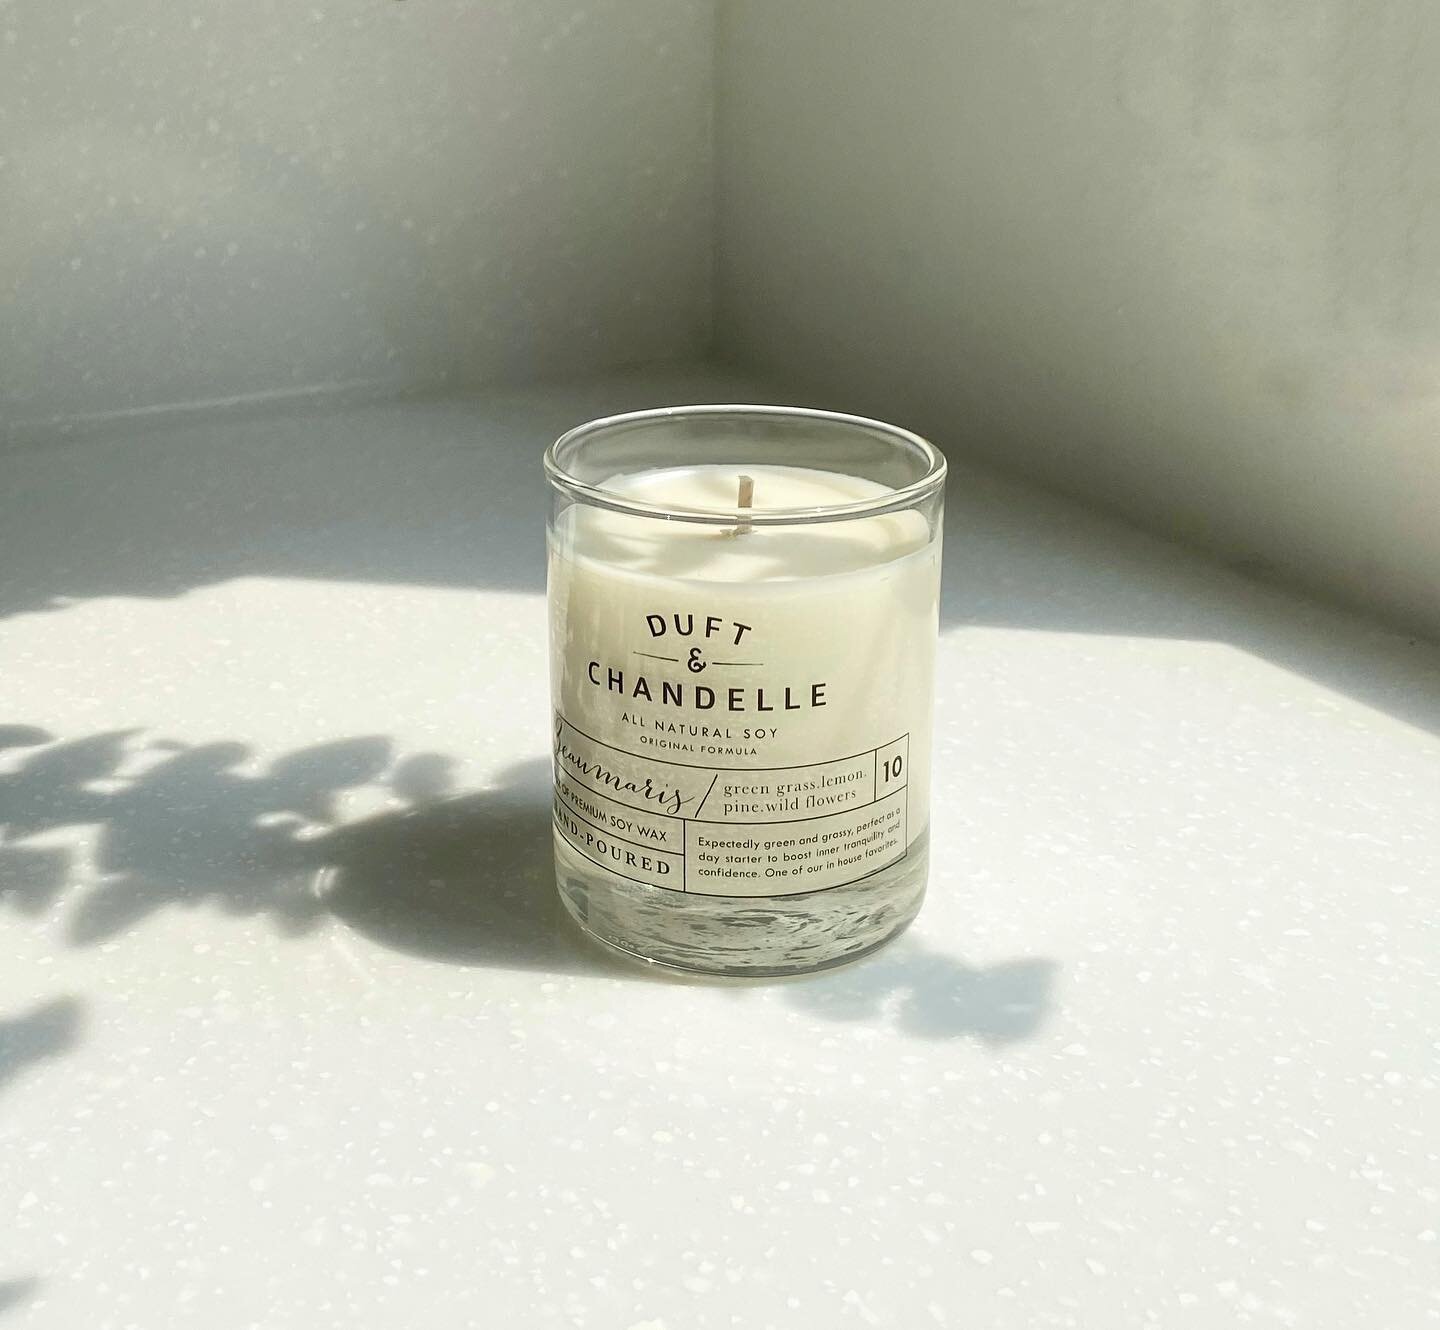 Warm light and glorious scent for your upcoming weekend.